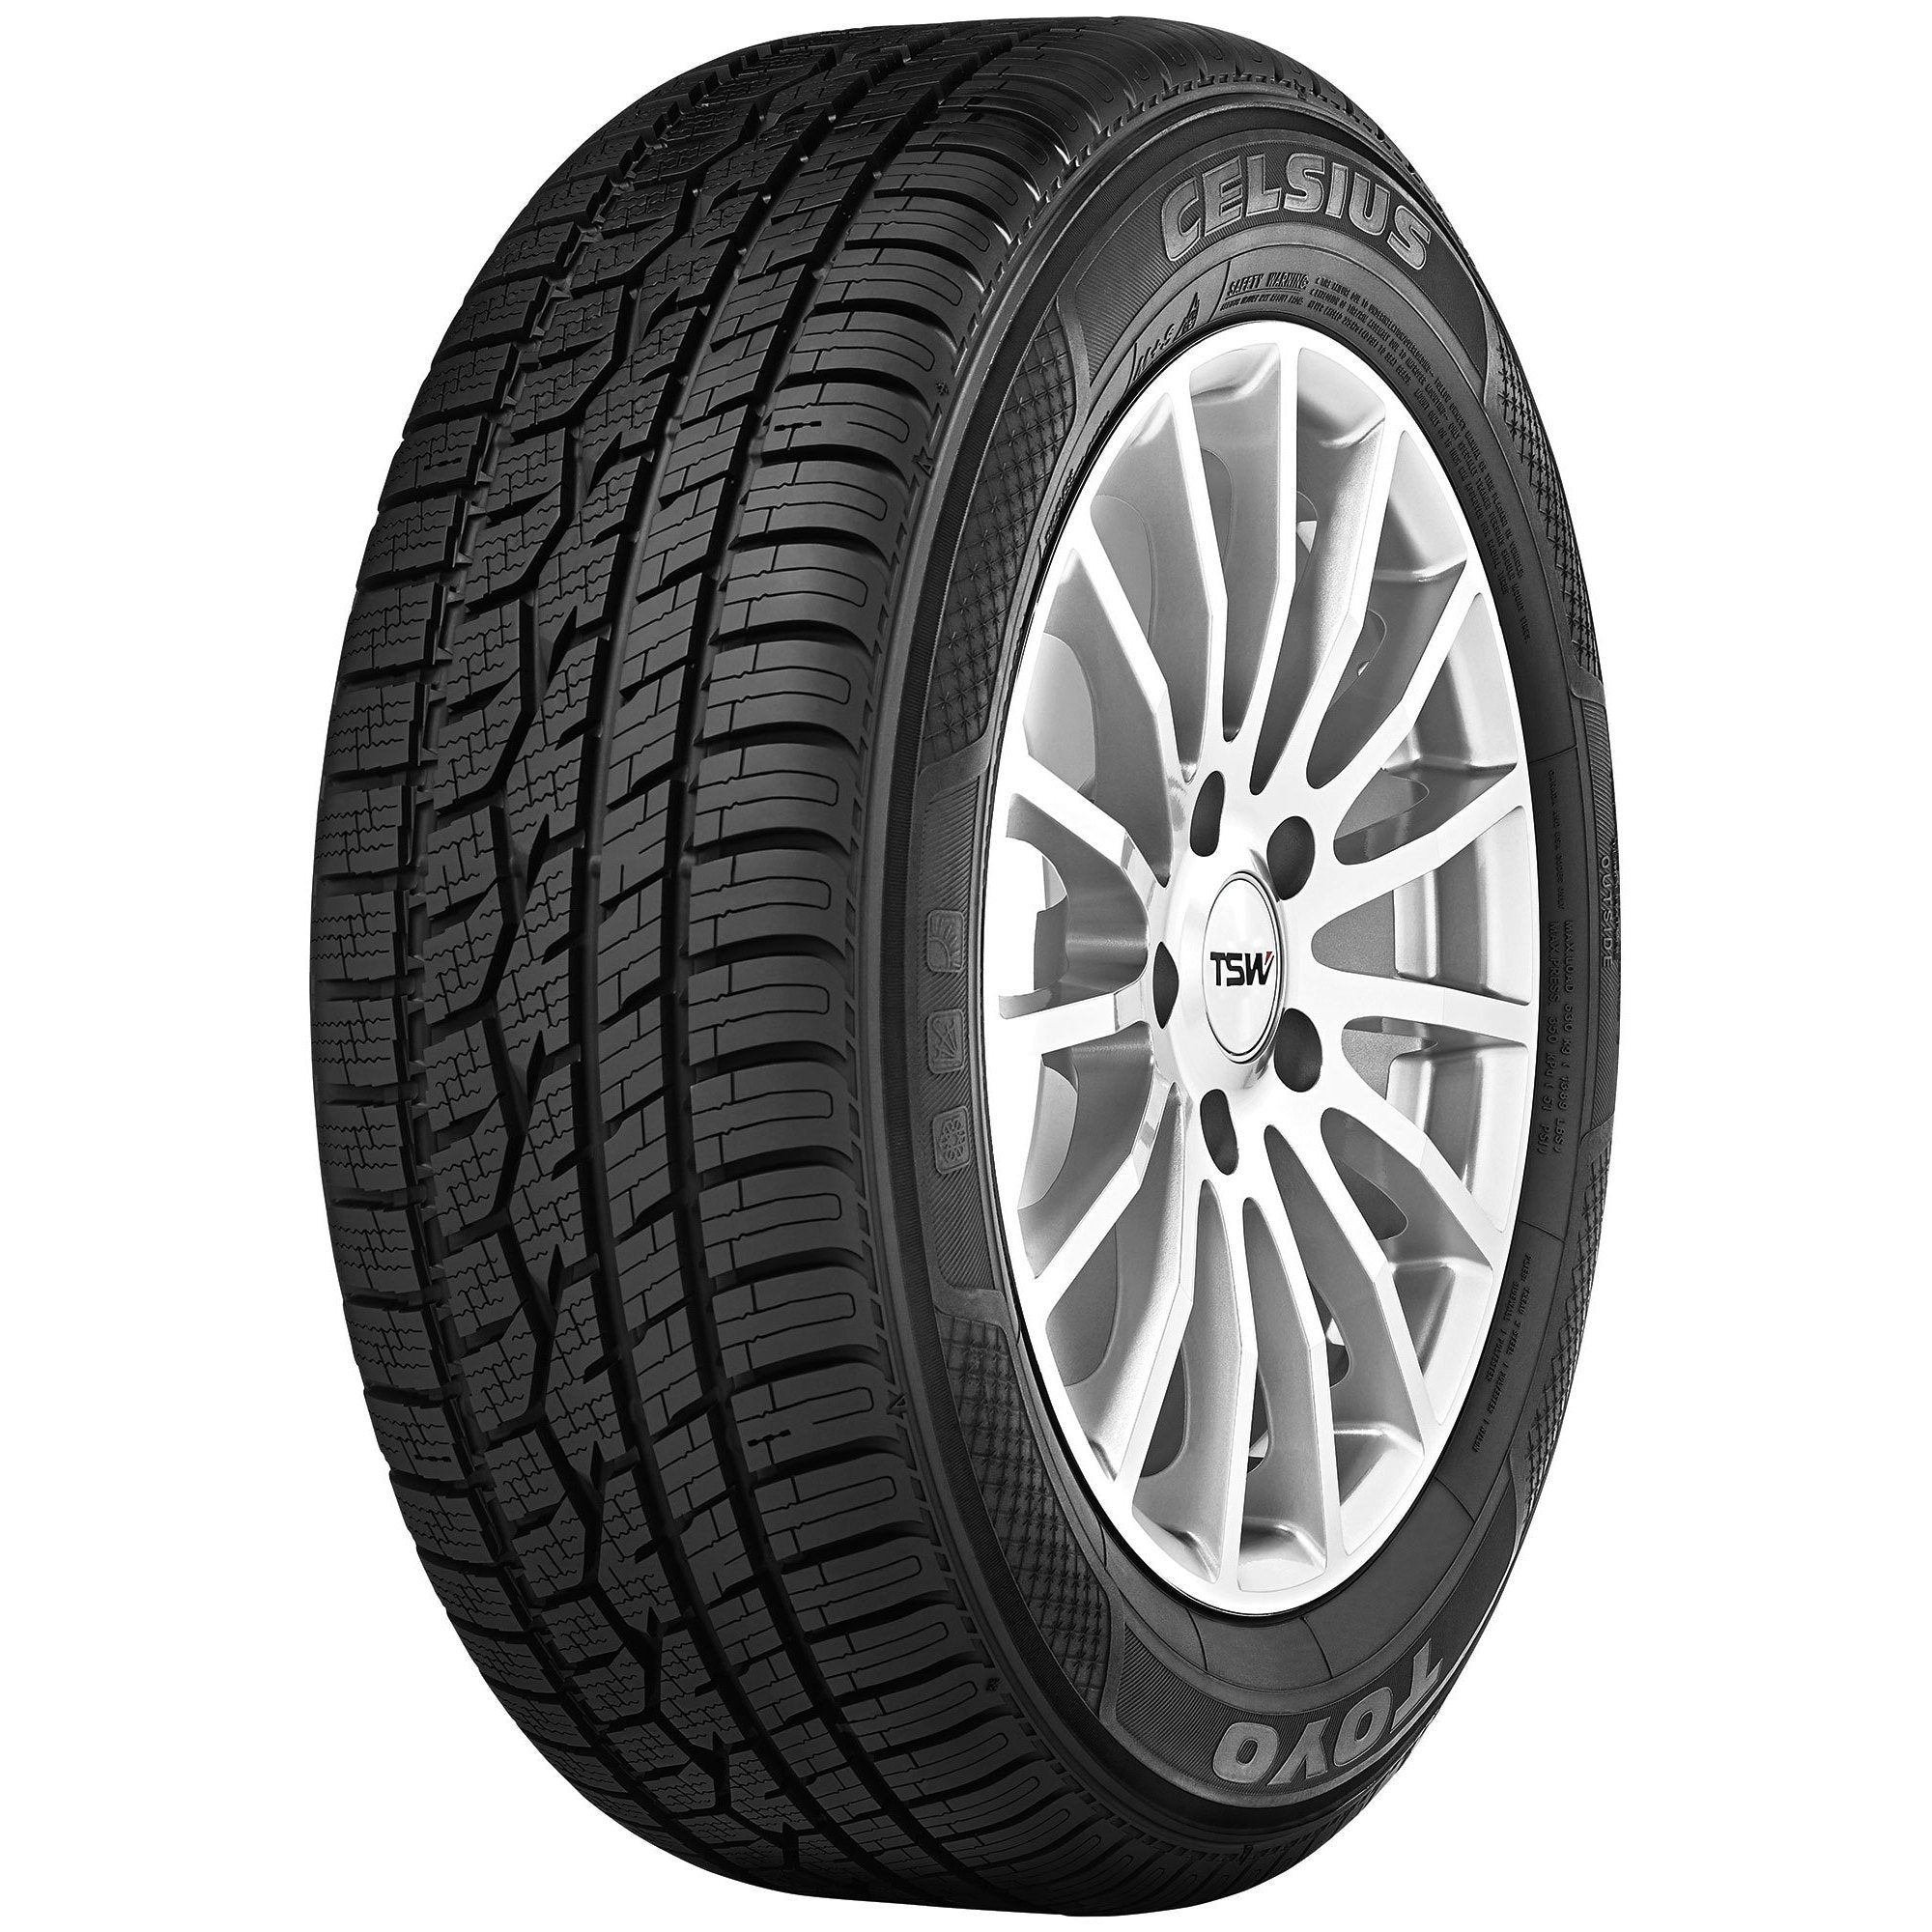 Quality tires at a value price – TiresFactoryDirect